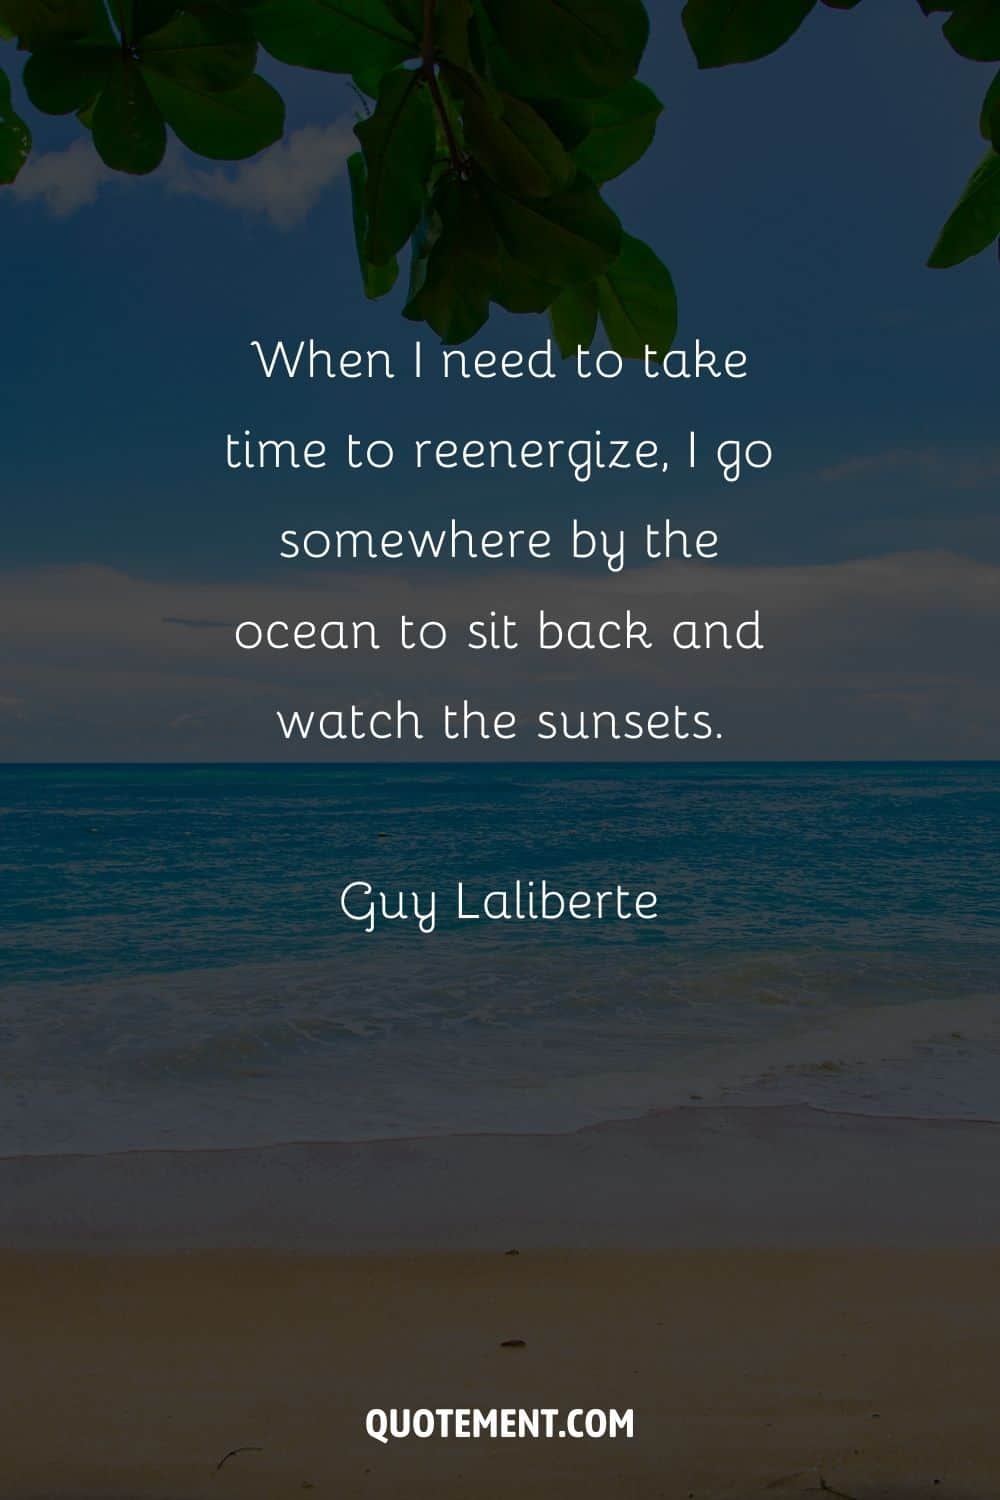 When I need to take time to reenergize, I go somewhere by the ocean to sit back and watch the sunsets. – Guy Laliberte